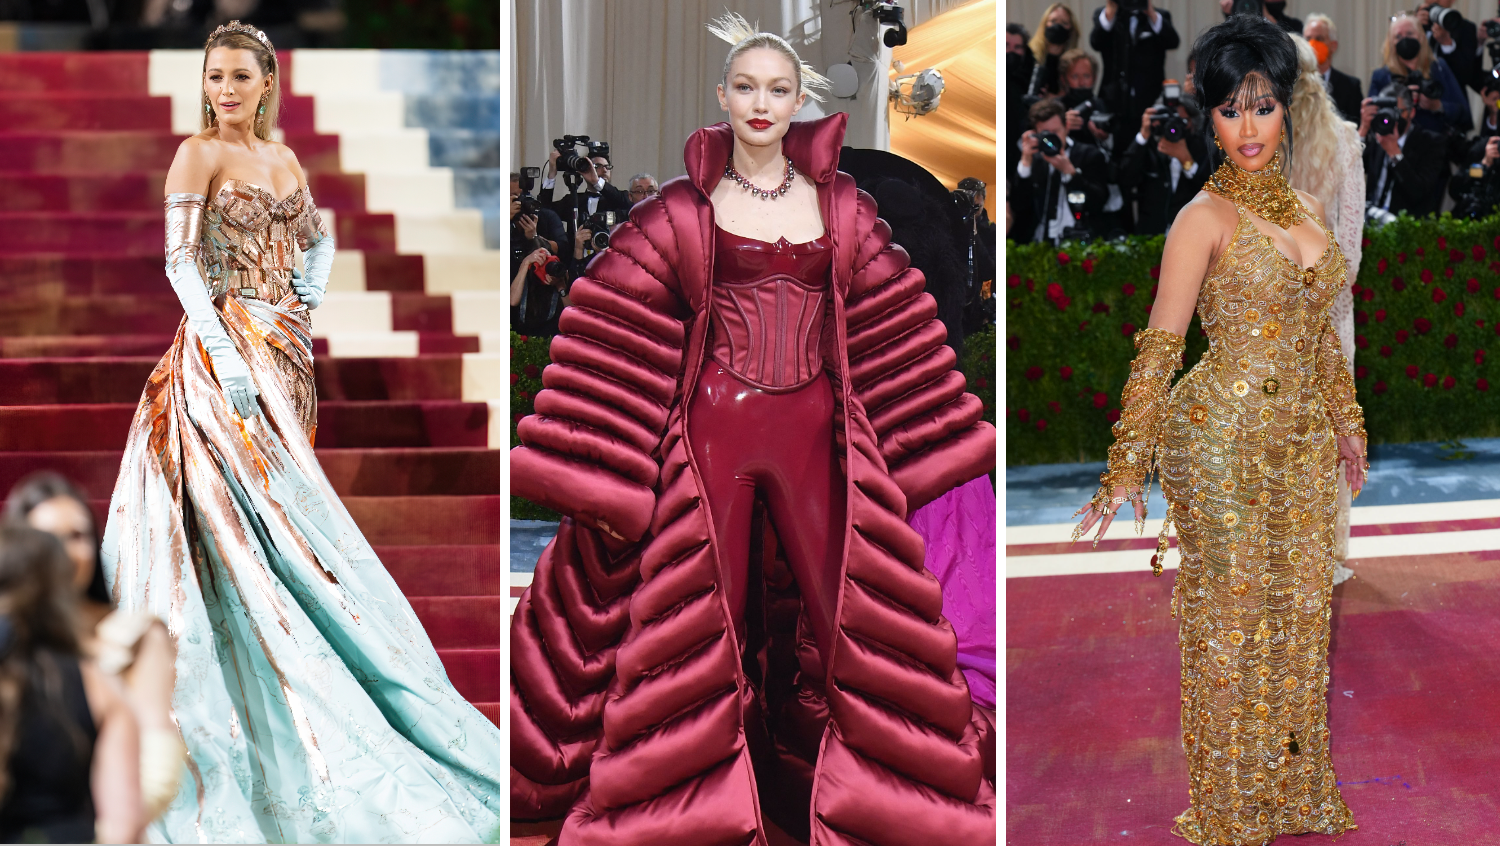 Met Gala 2023 Outfits: All the Looks and Fashion From the Red Carpet